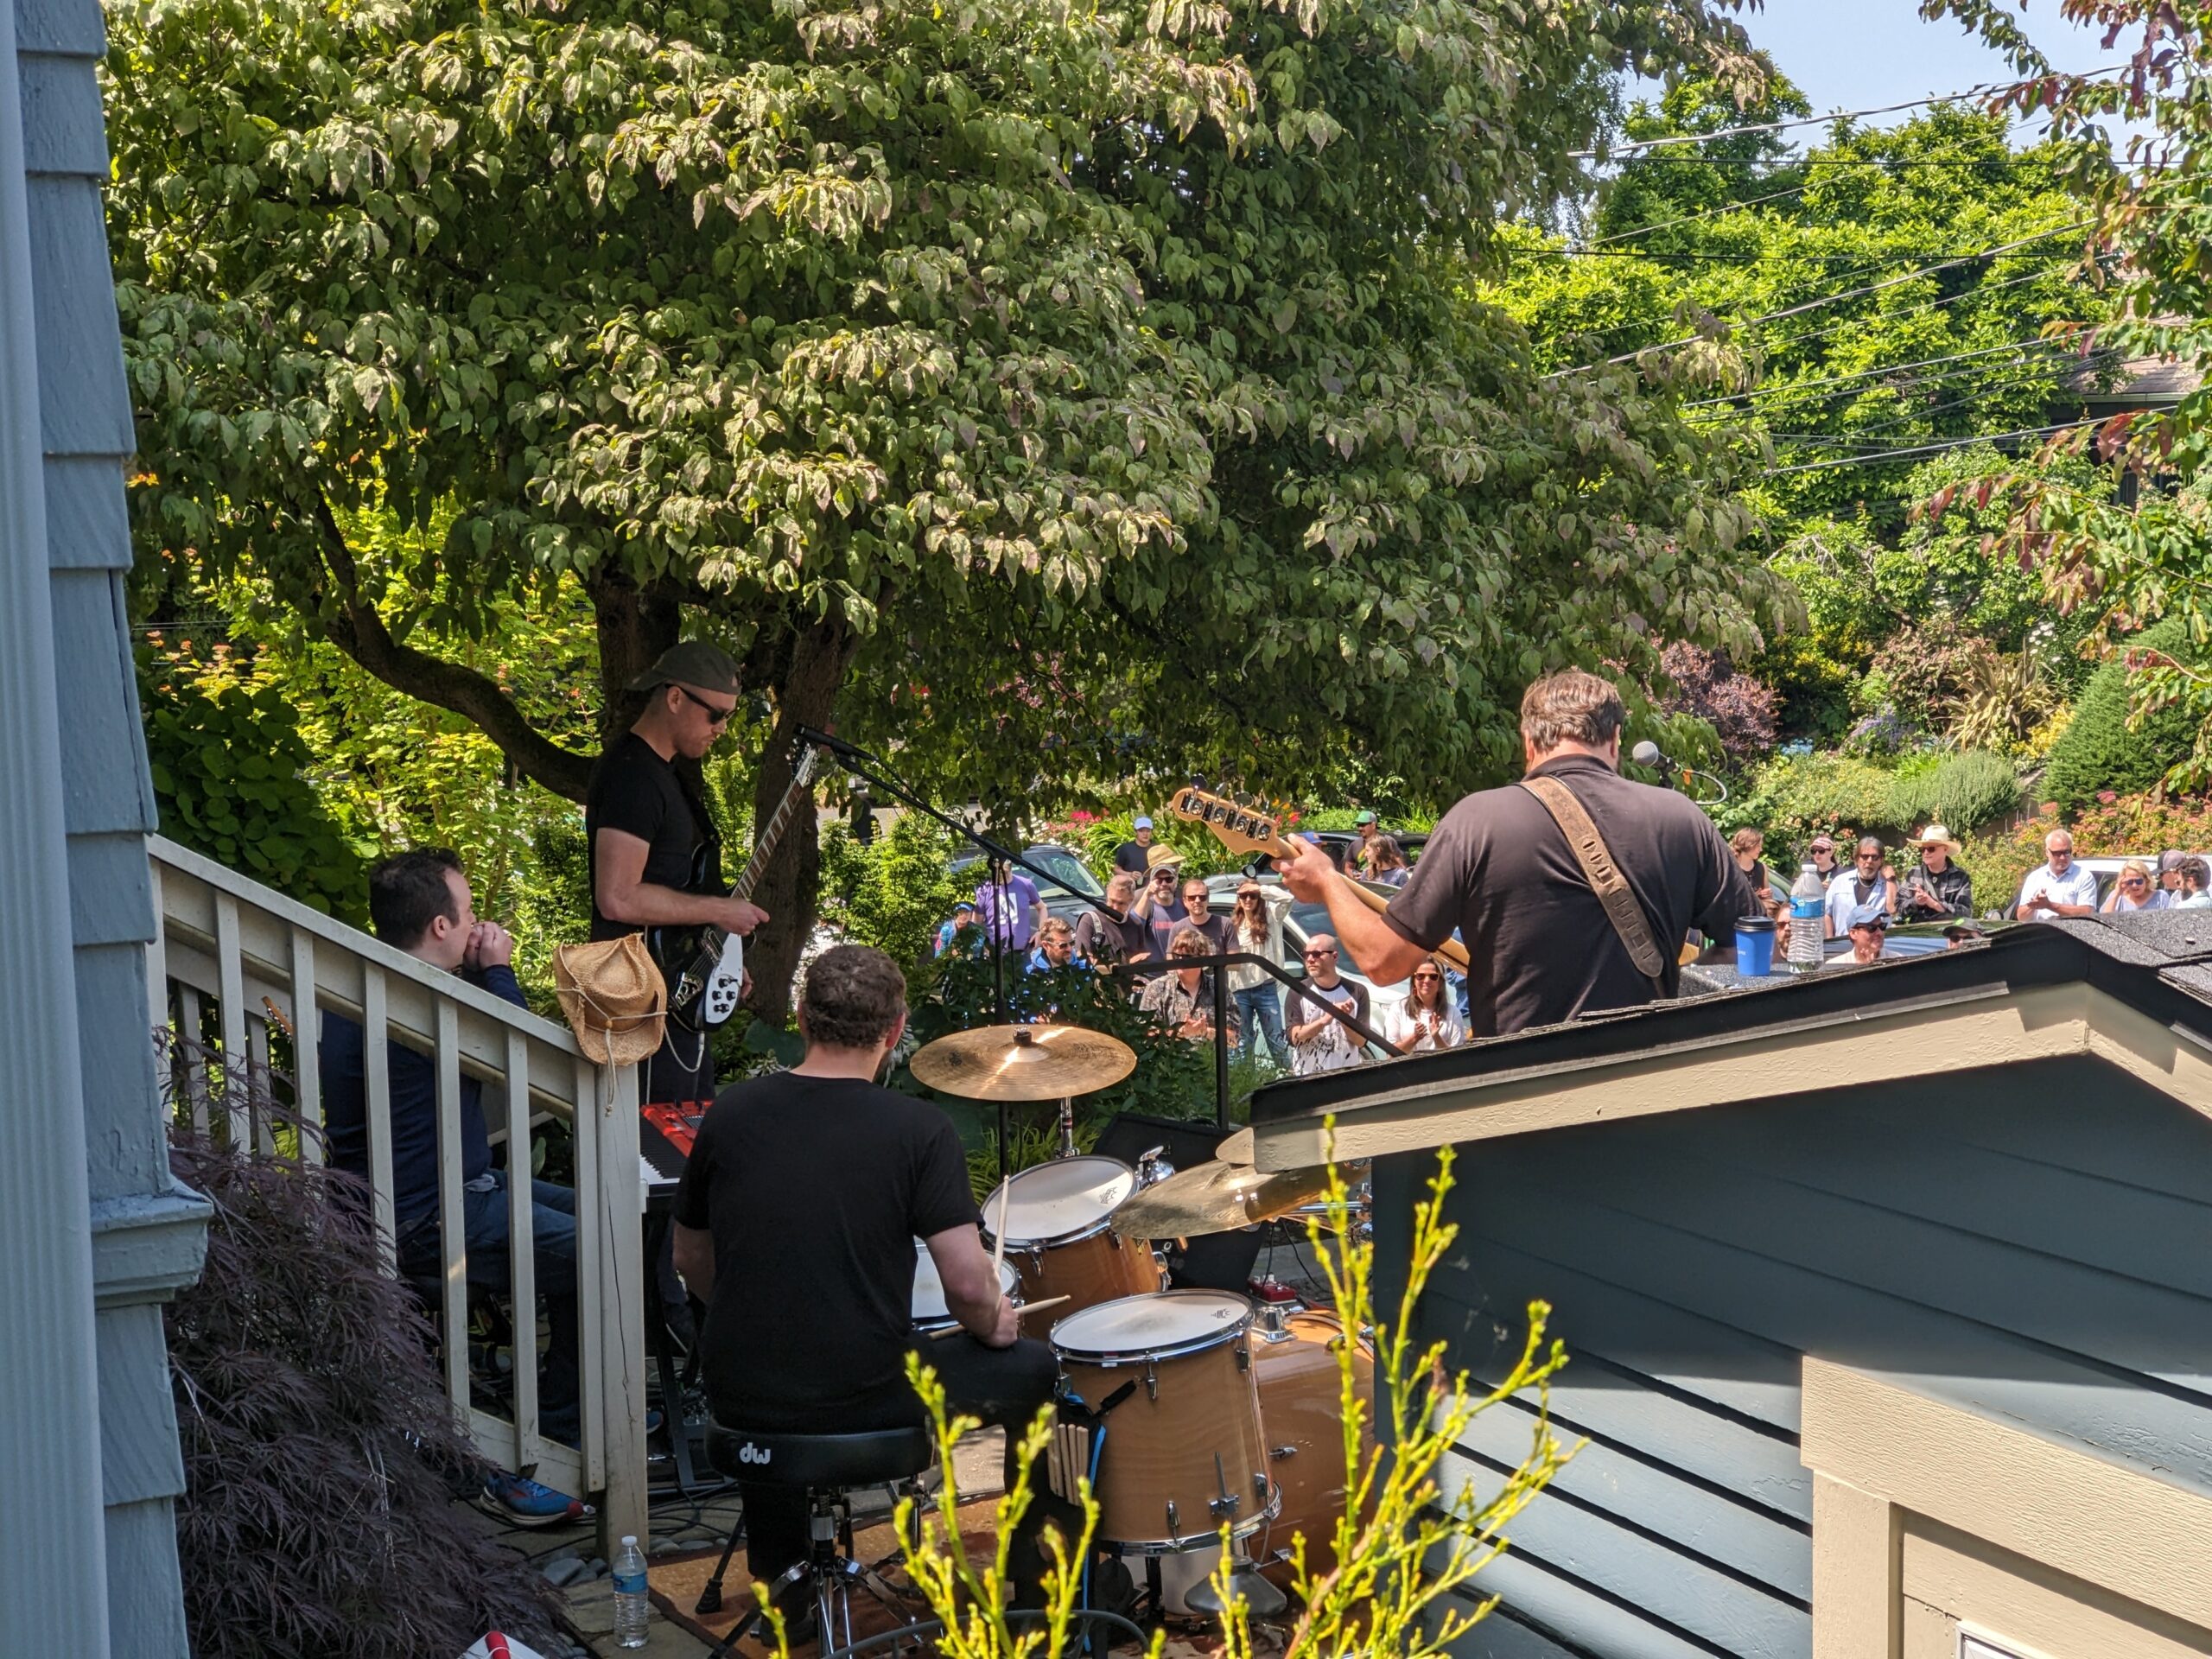 Shot of a band with a guitar, bass, keyboards, and drums playing on a residential front porch with people standing on the sidewalk watching in the background.